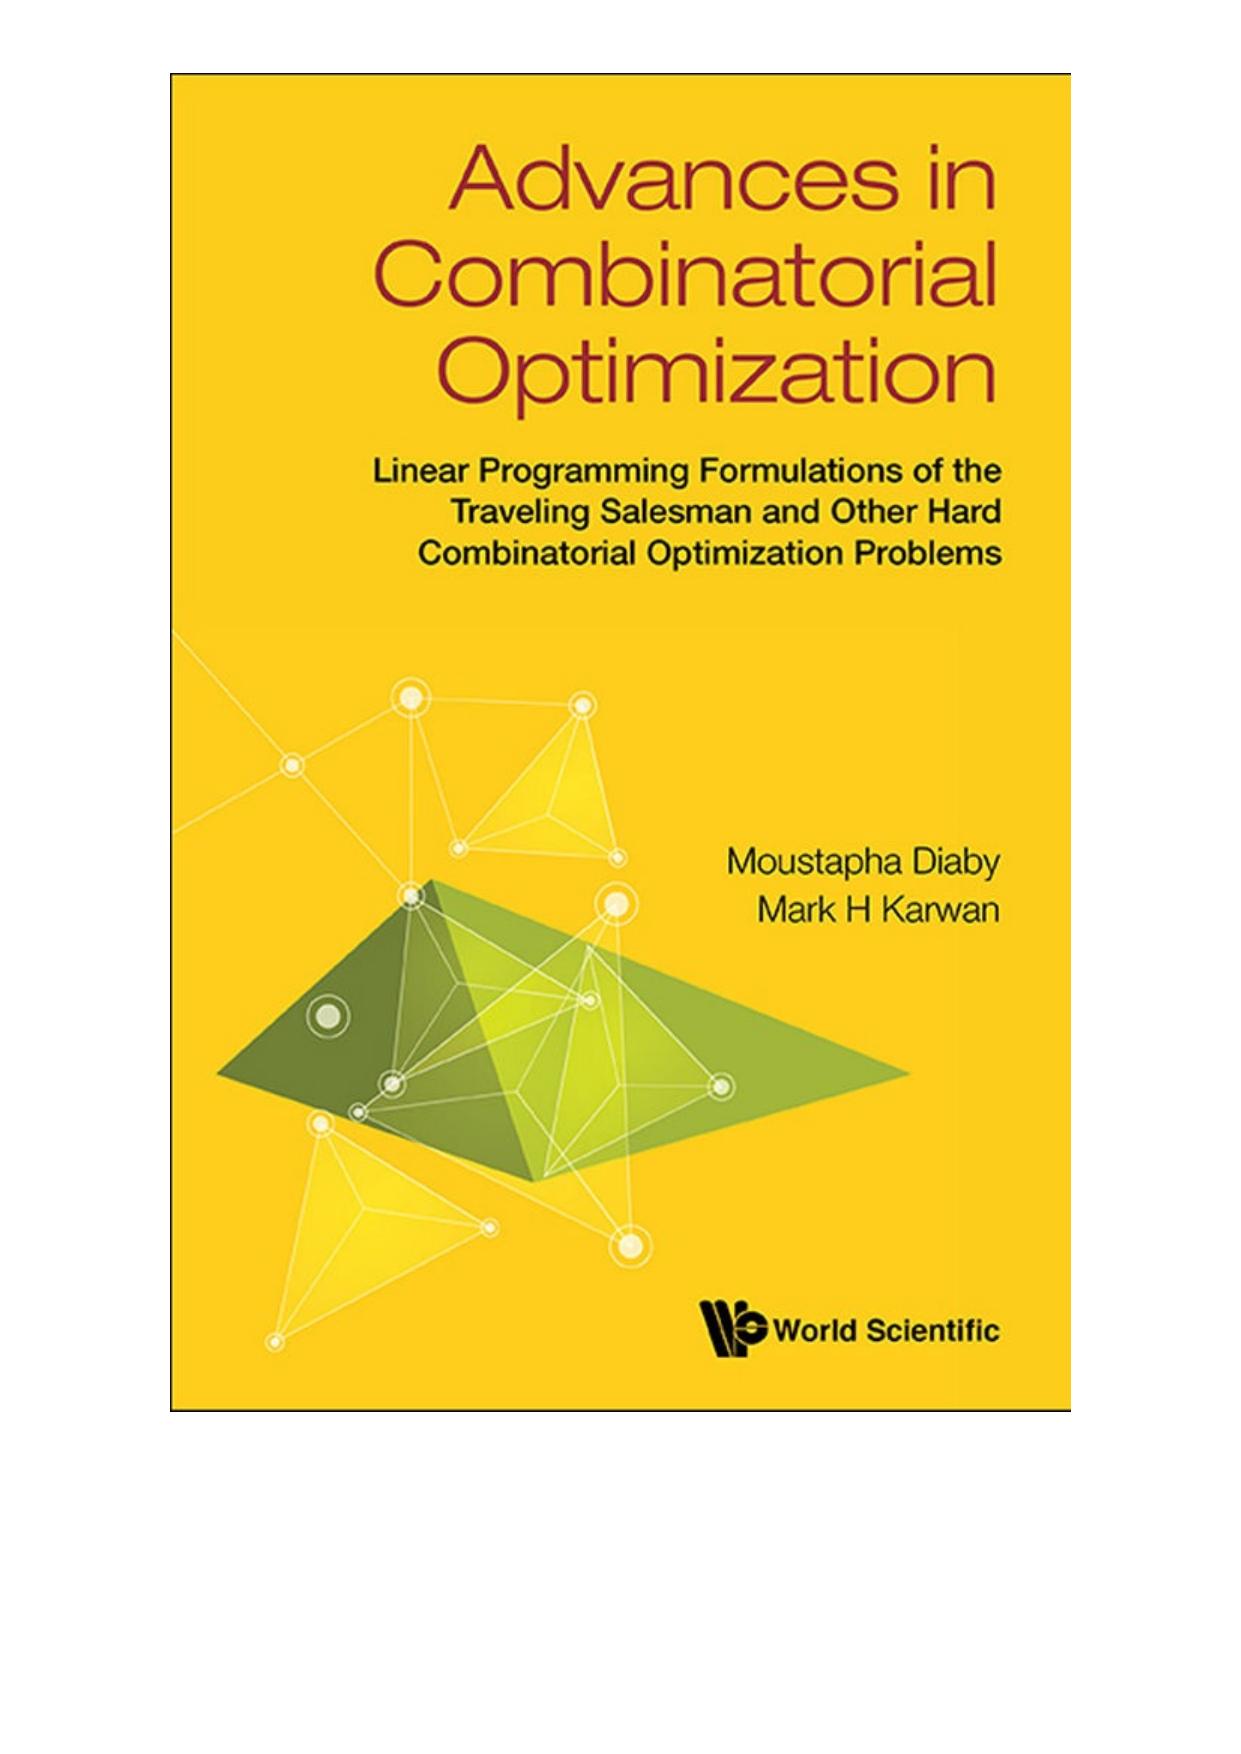 Advances in Combinatorial Optimization:Linear Programming Formulations of the Traveling Salesman and Other Hard Combinatorial Optimization Problems